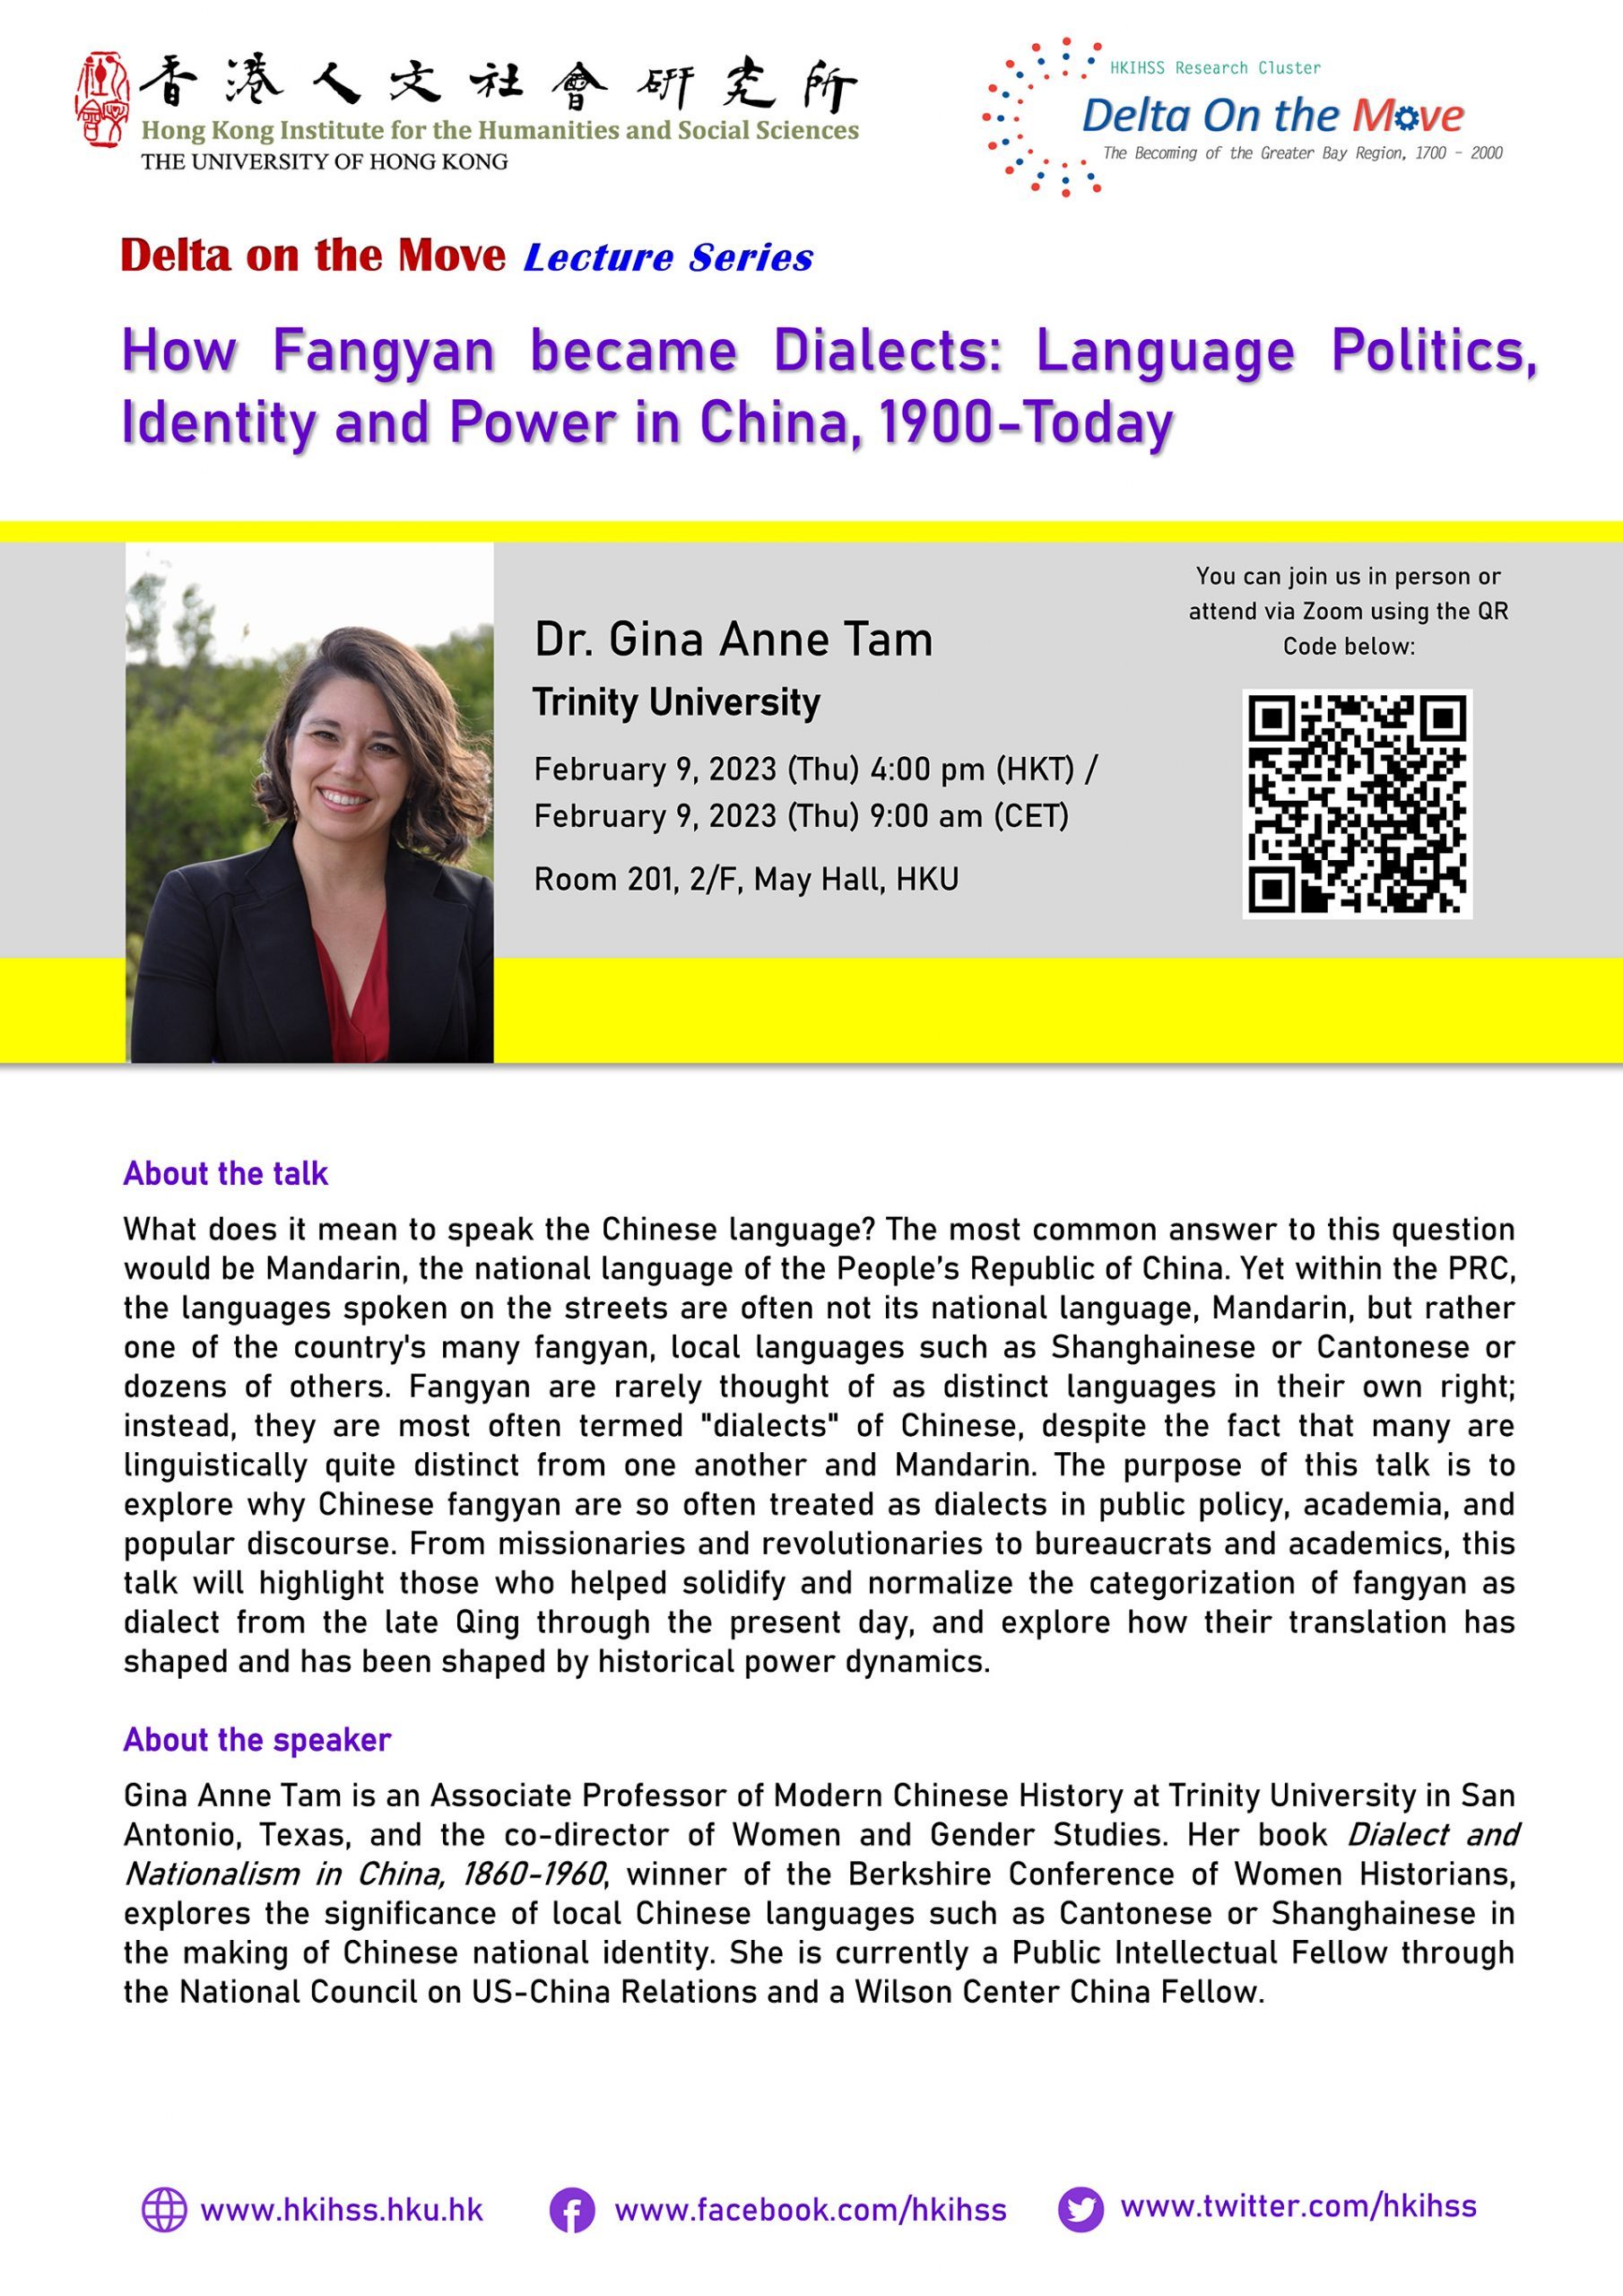 Delta on the Move Lecture Series “How Fangyan became Dialects: Language Politics, Identity and Power in China, 1900-Today